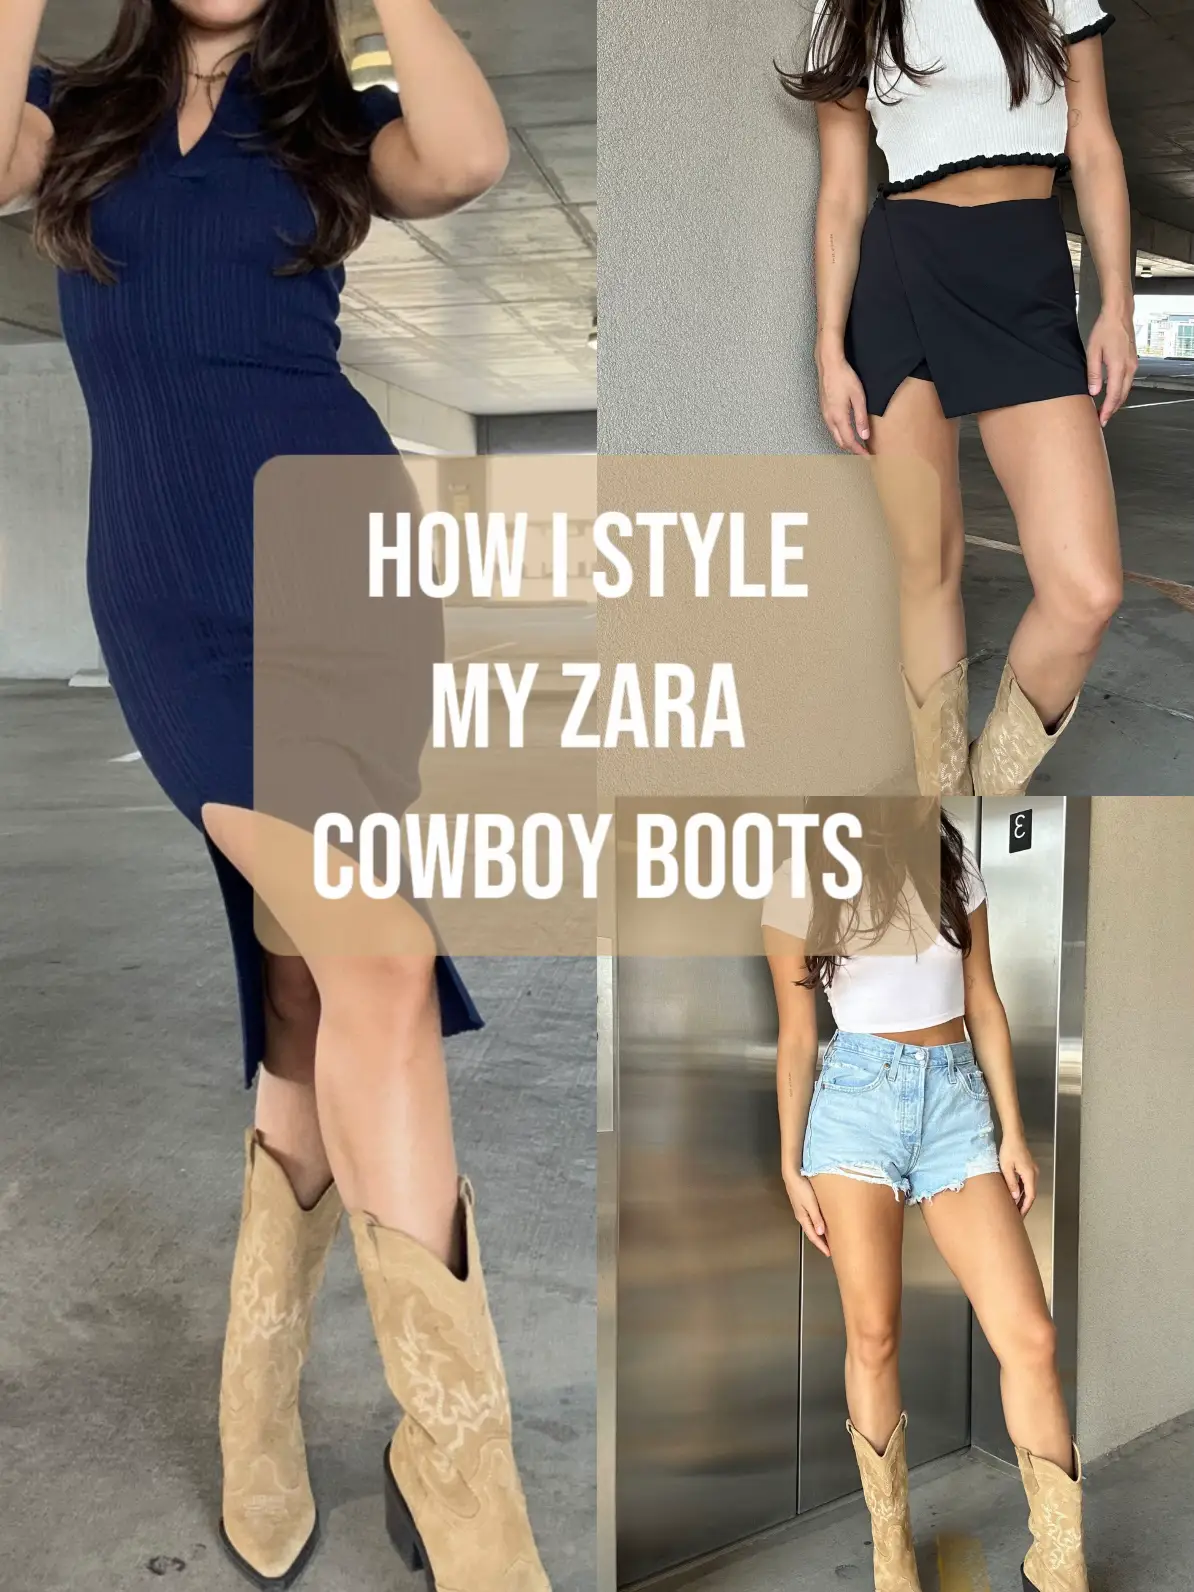 HOW I STYLE MY ZARA COWBOY BOOTS, Gallery posted by abby